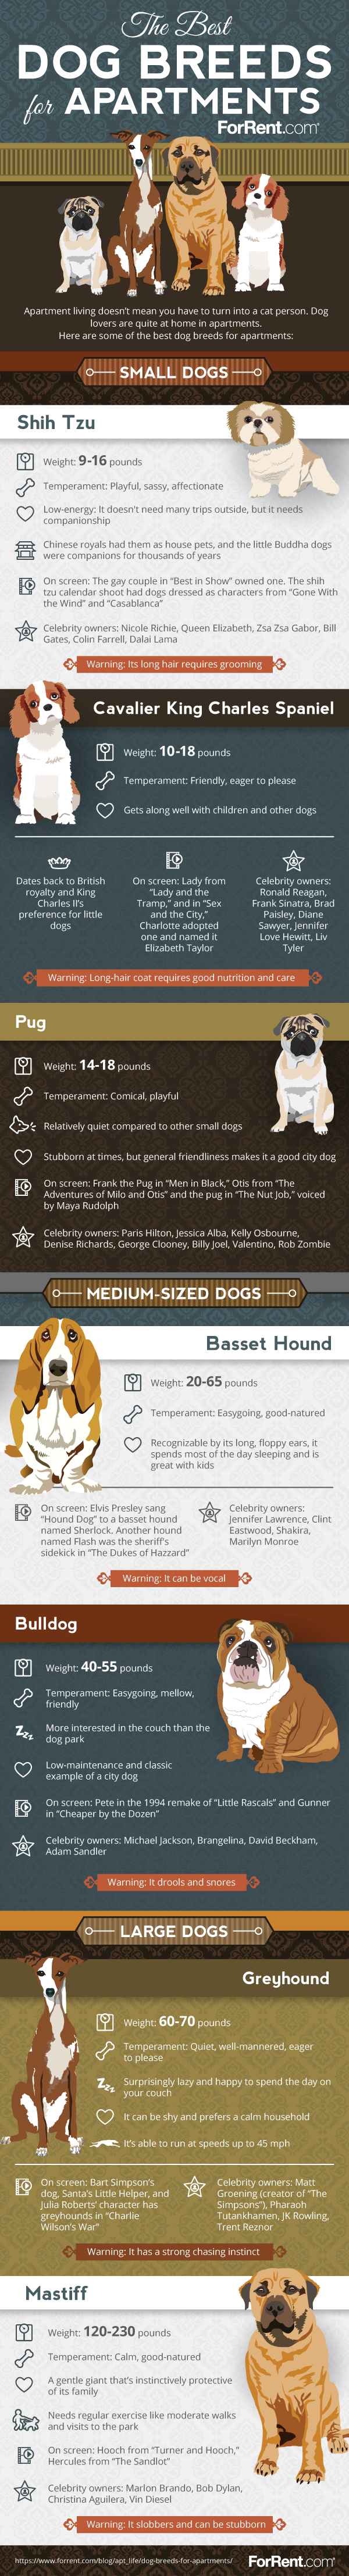 The Best Dog Breeds for Apartments